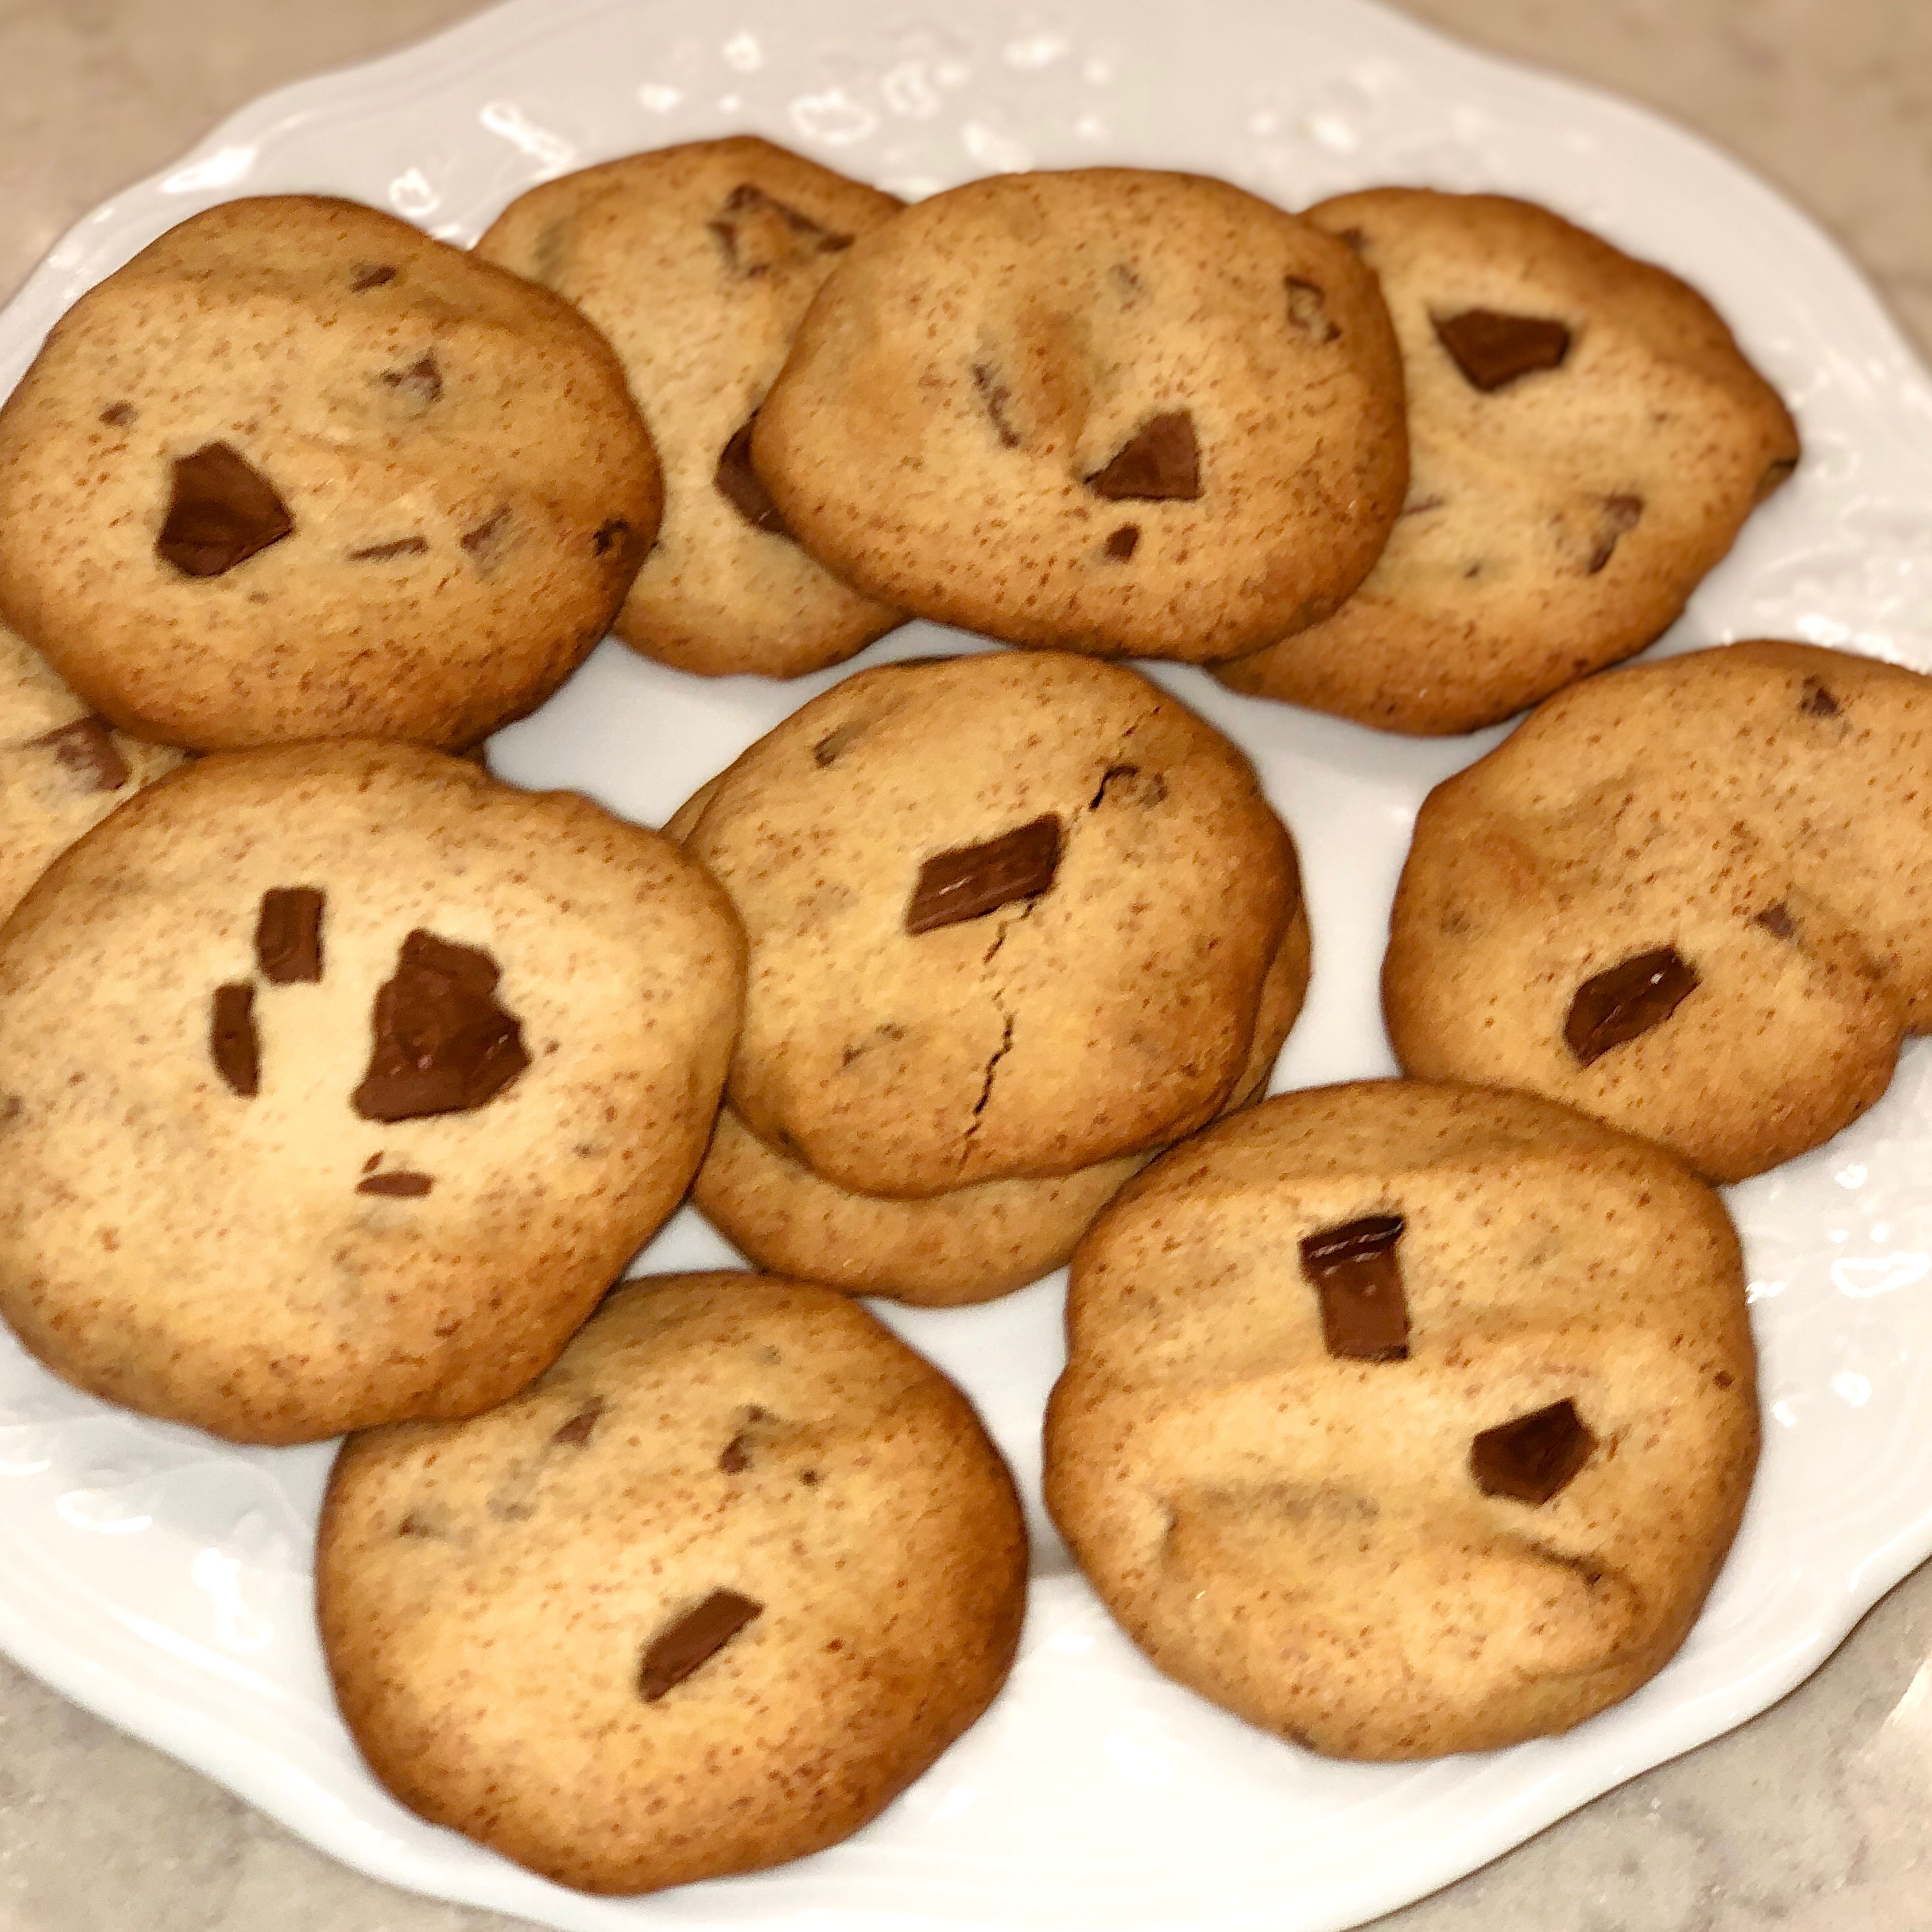 Chocolate chip cookies ))))